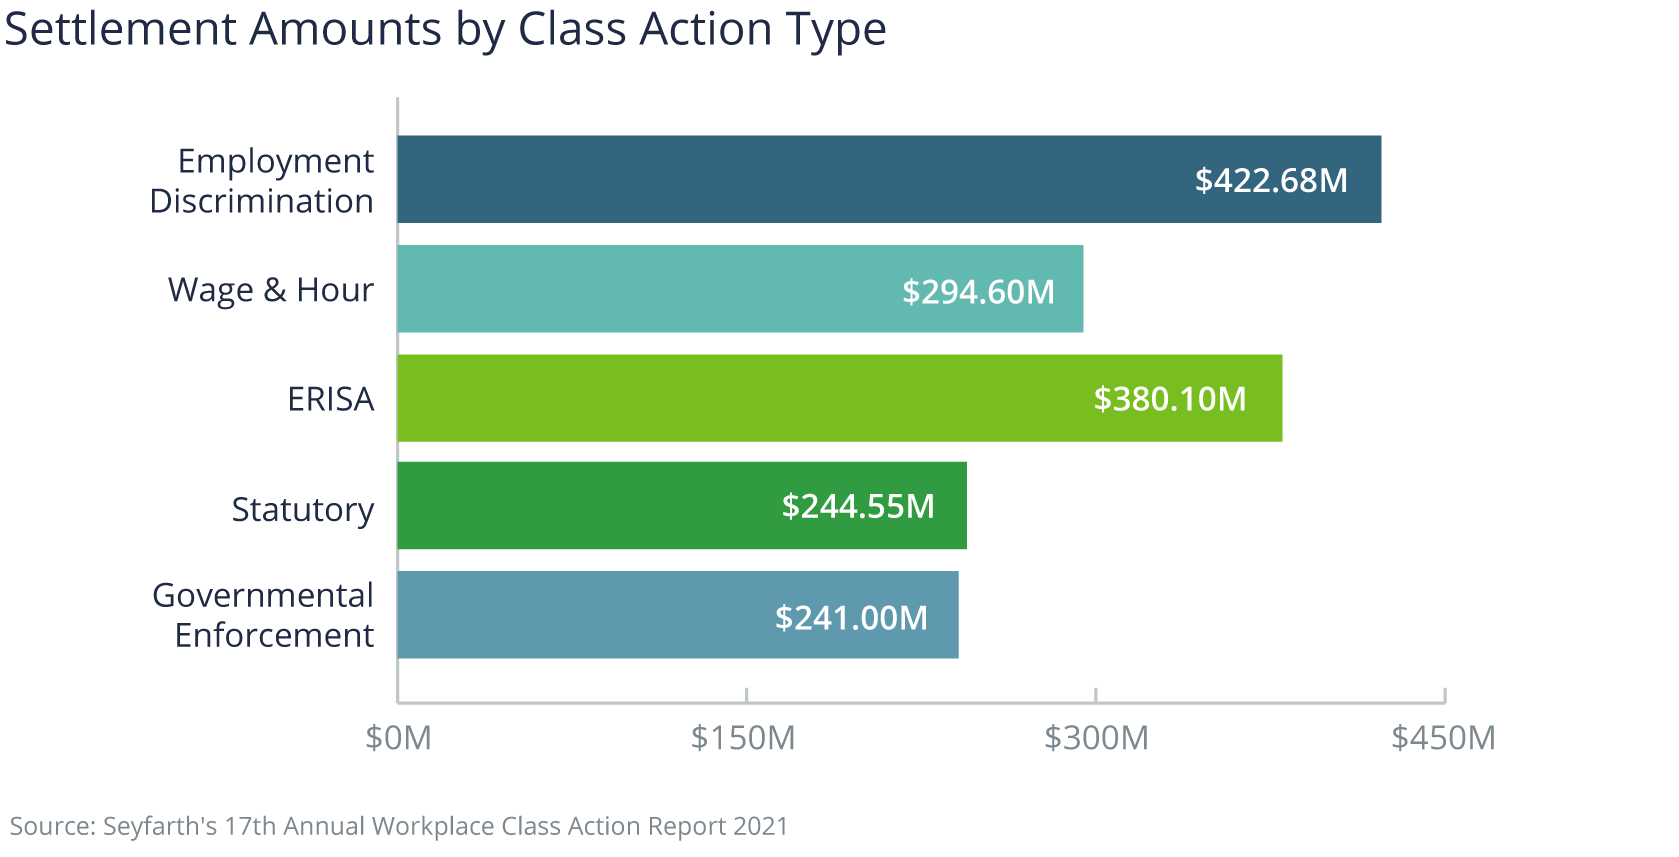 Settlement Amounts by Class Action Type - Employment Discrimination is highest at $422.68 Million